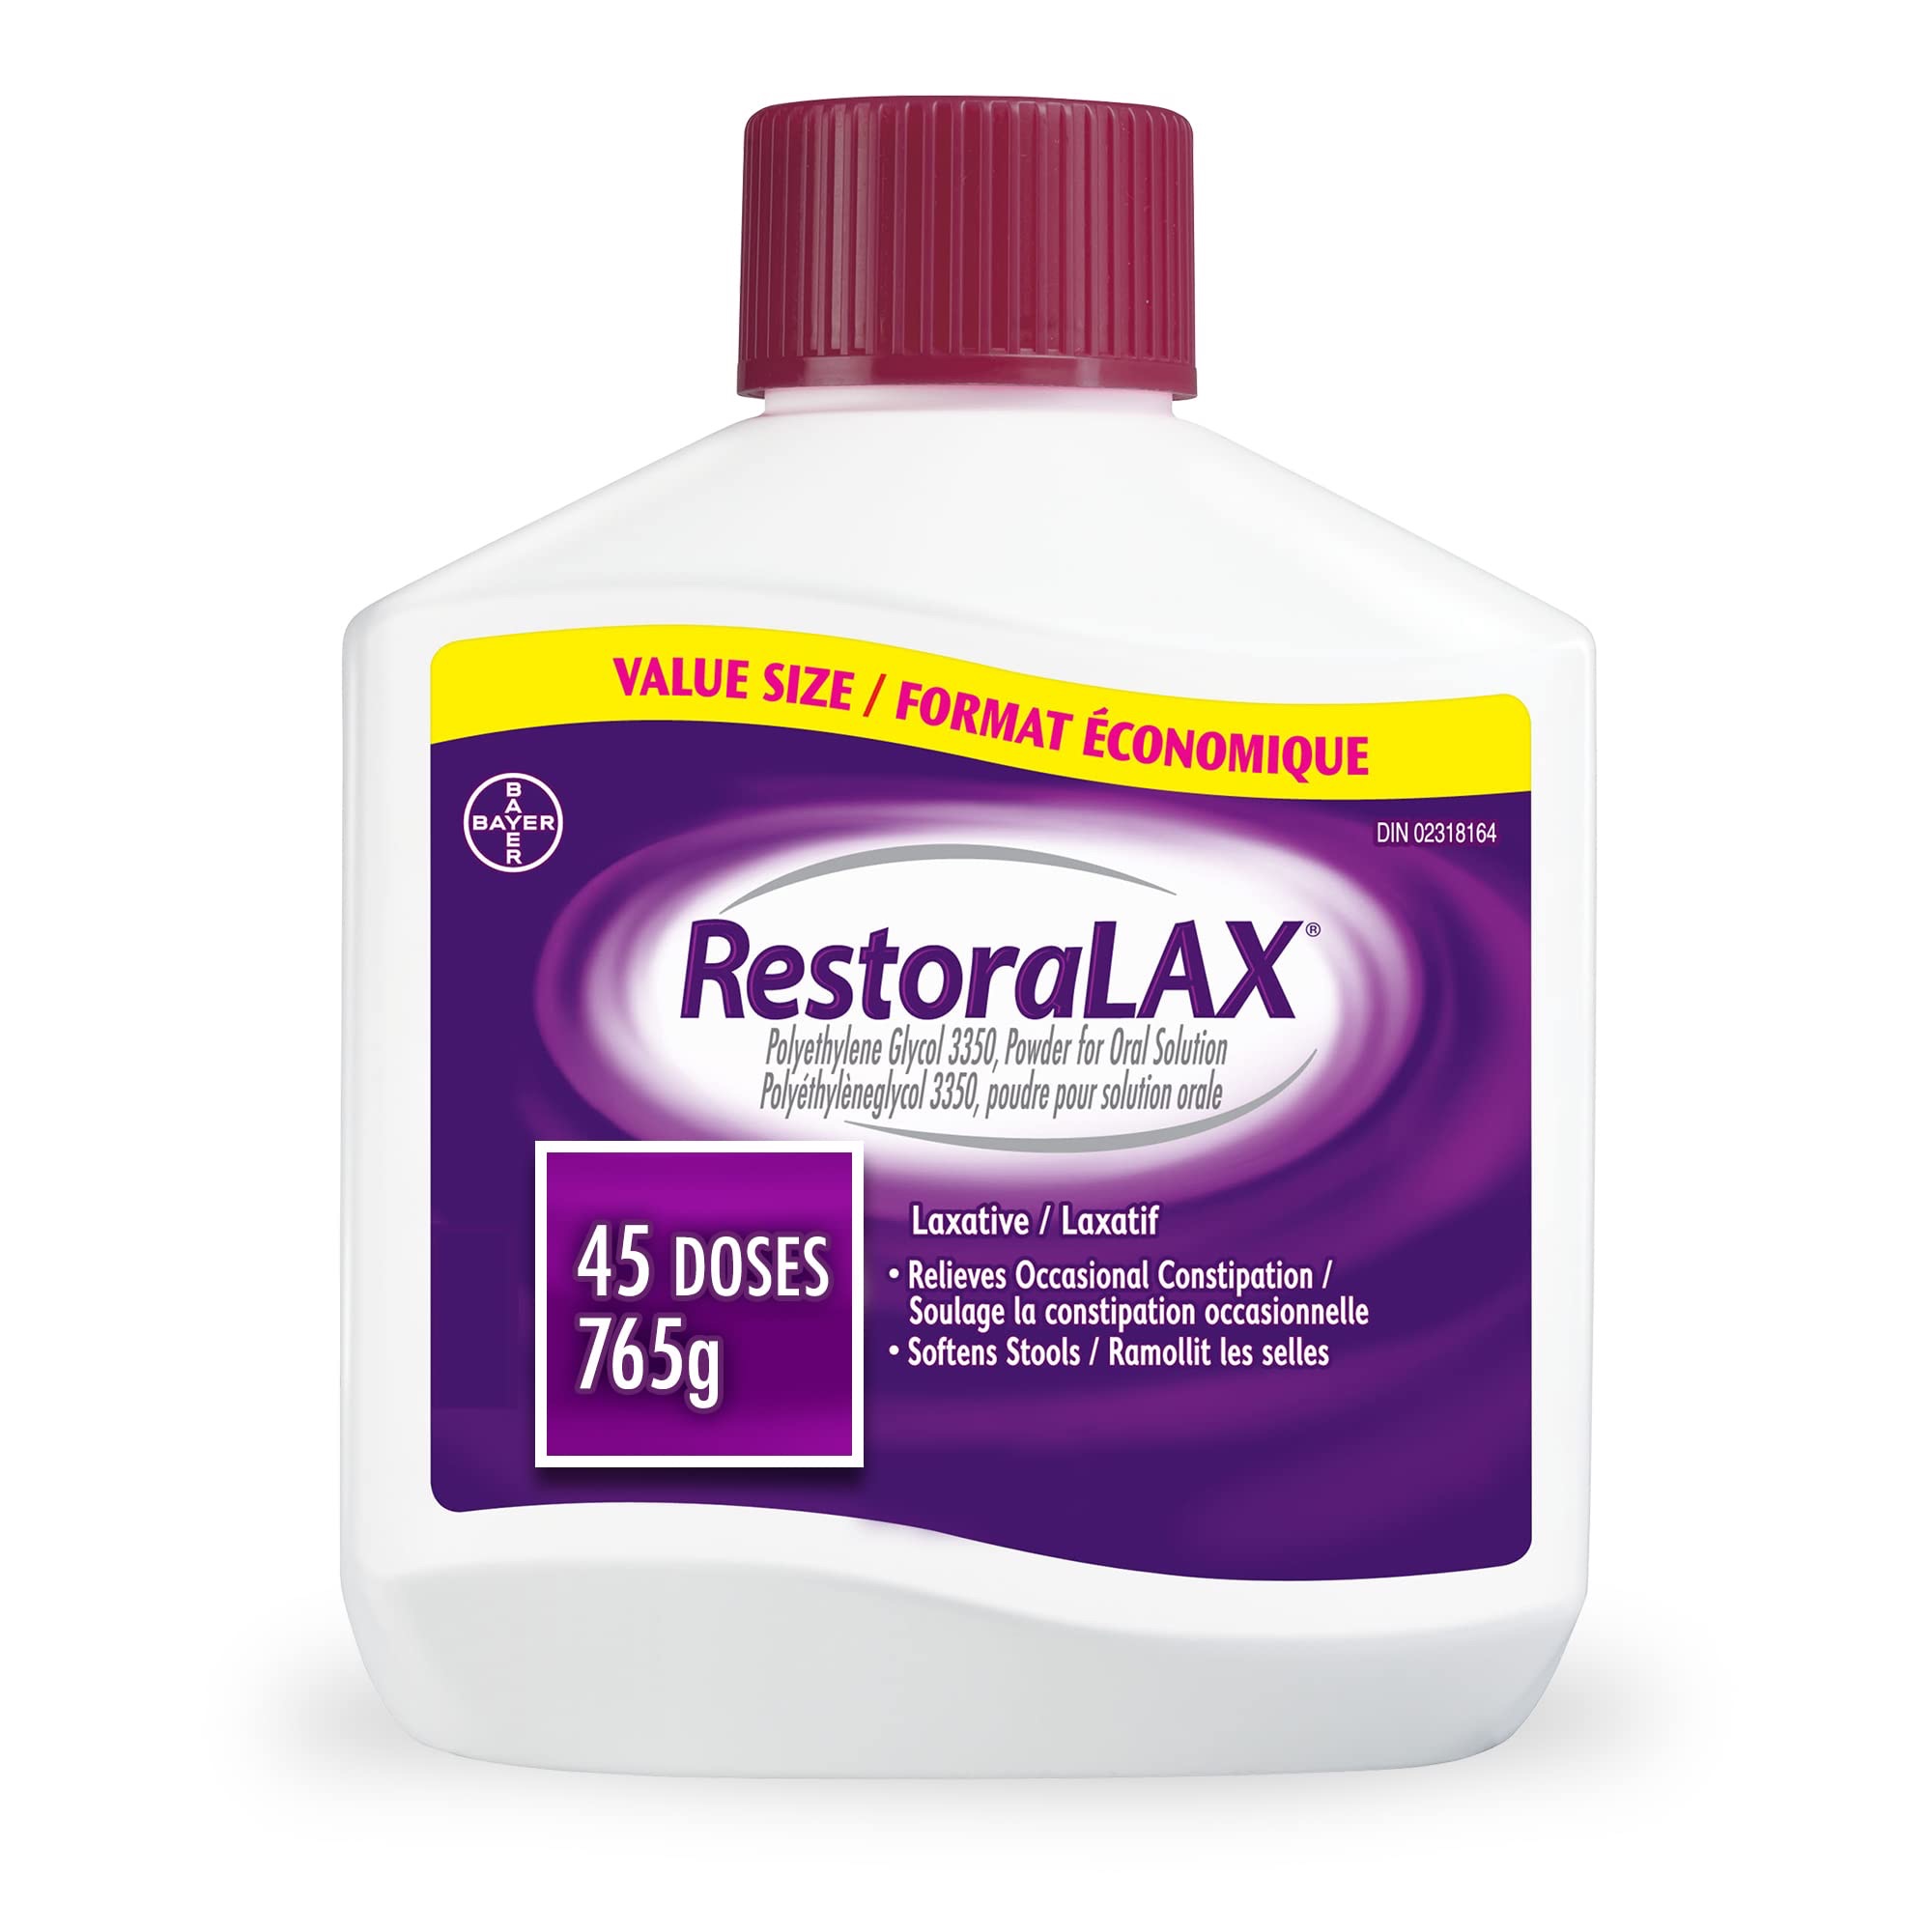 RestoraLAX Powder Stool Softener Laxative - Laxatives For Constipation, Effective Constipation Relief For Adults, No Taste, No Grit, No Gas, No Bloat, No Cramps, No Sudden Urge, 45 Doses, 765 grams : 